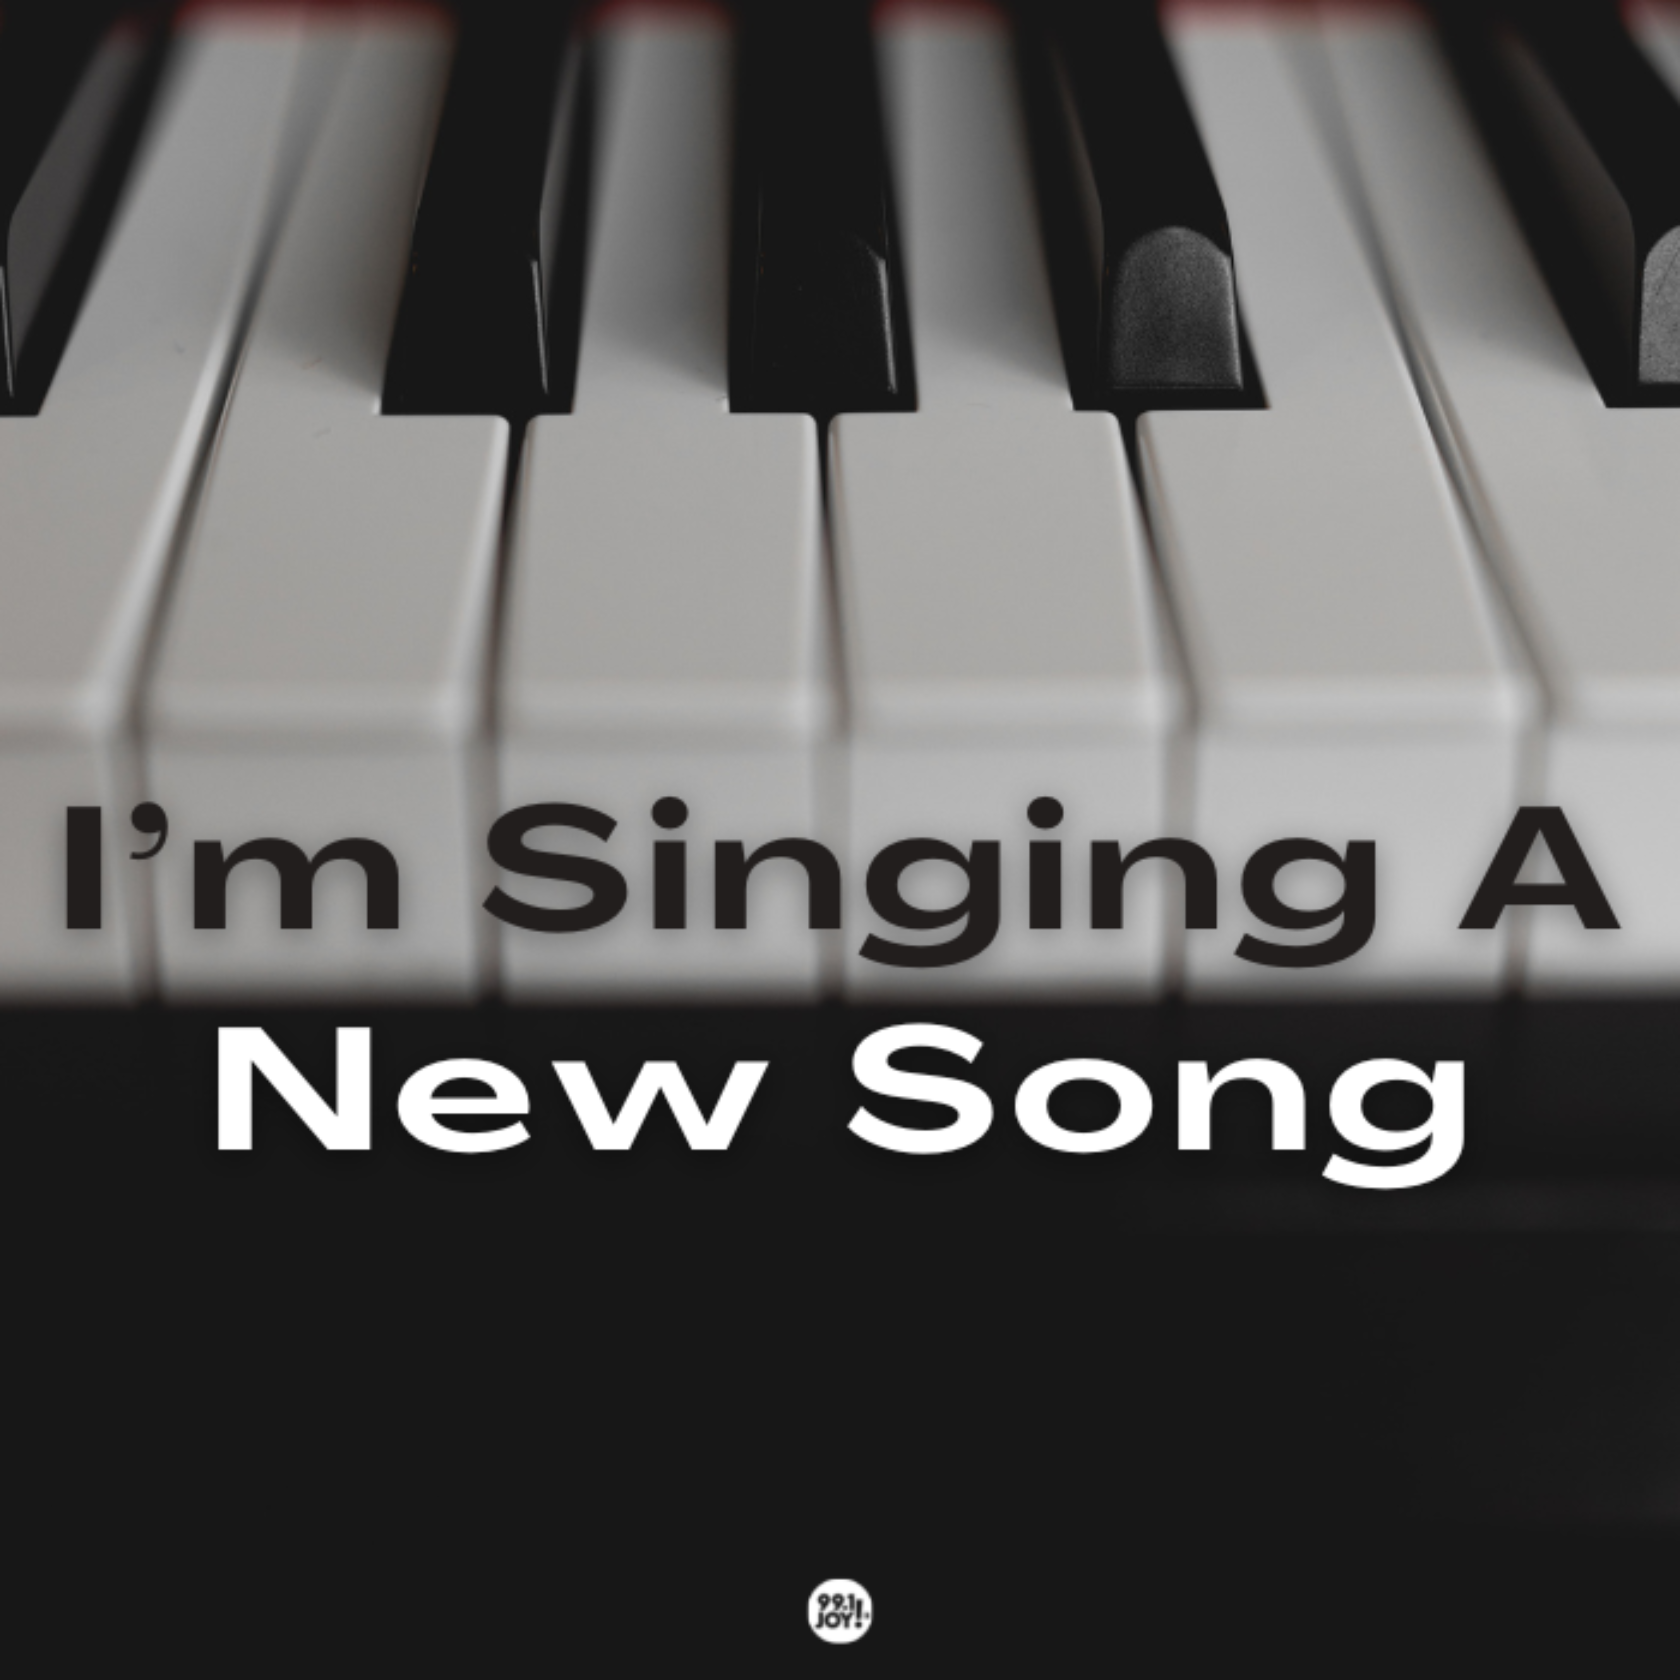 I’m Singing A New Song